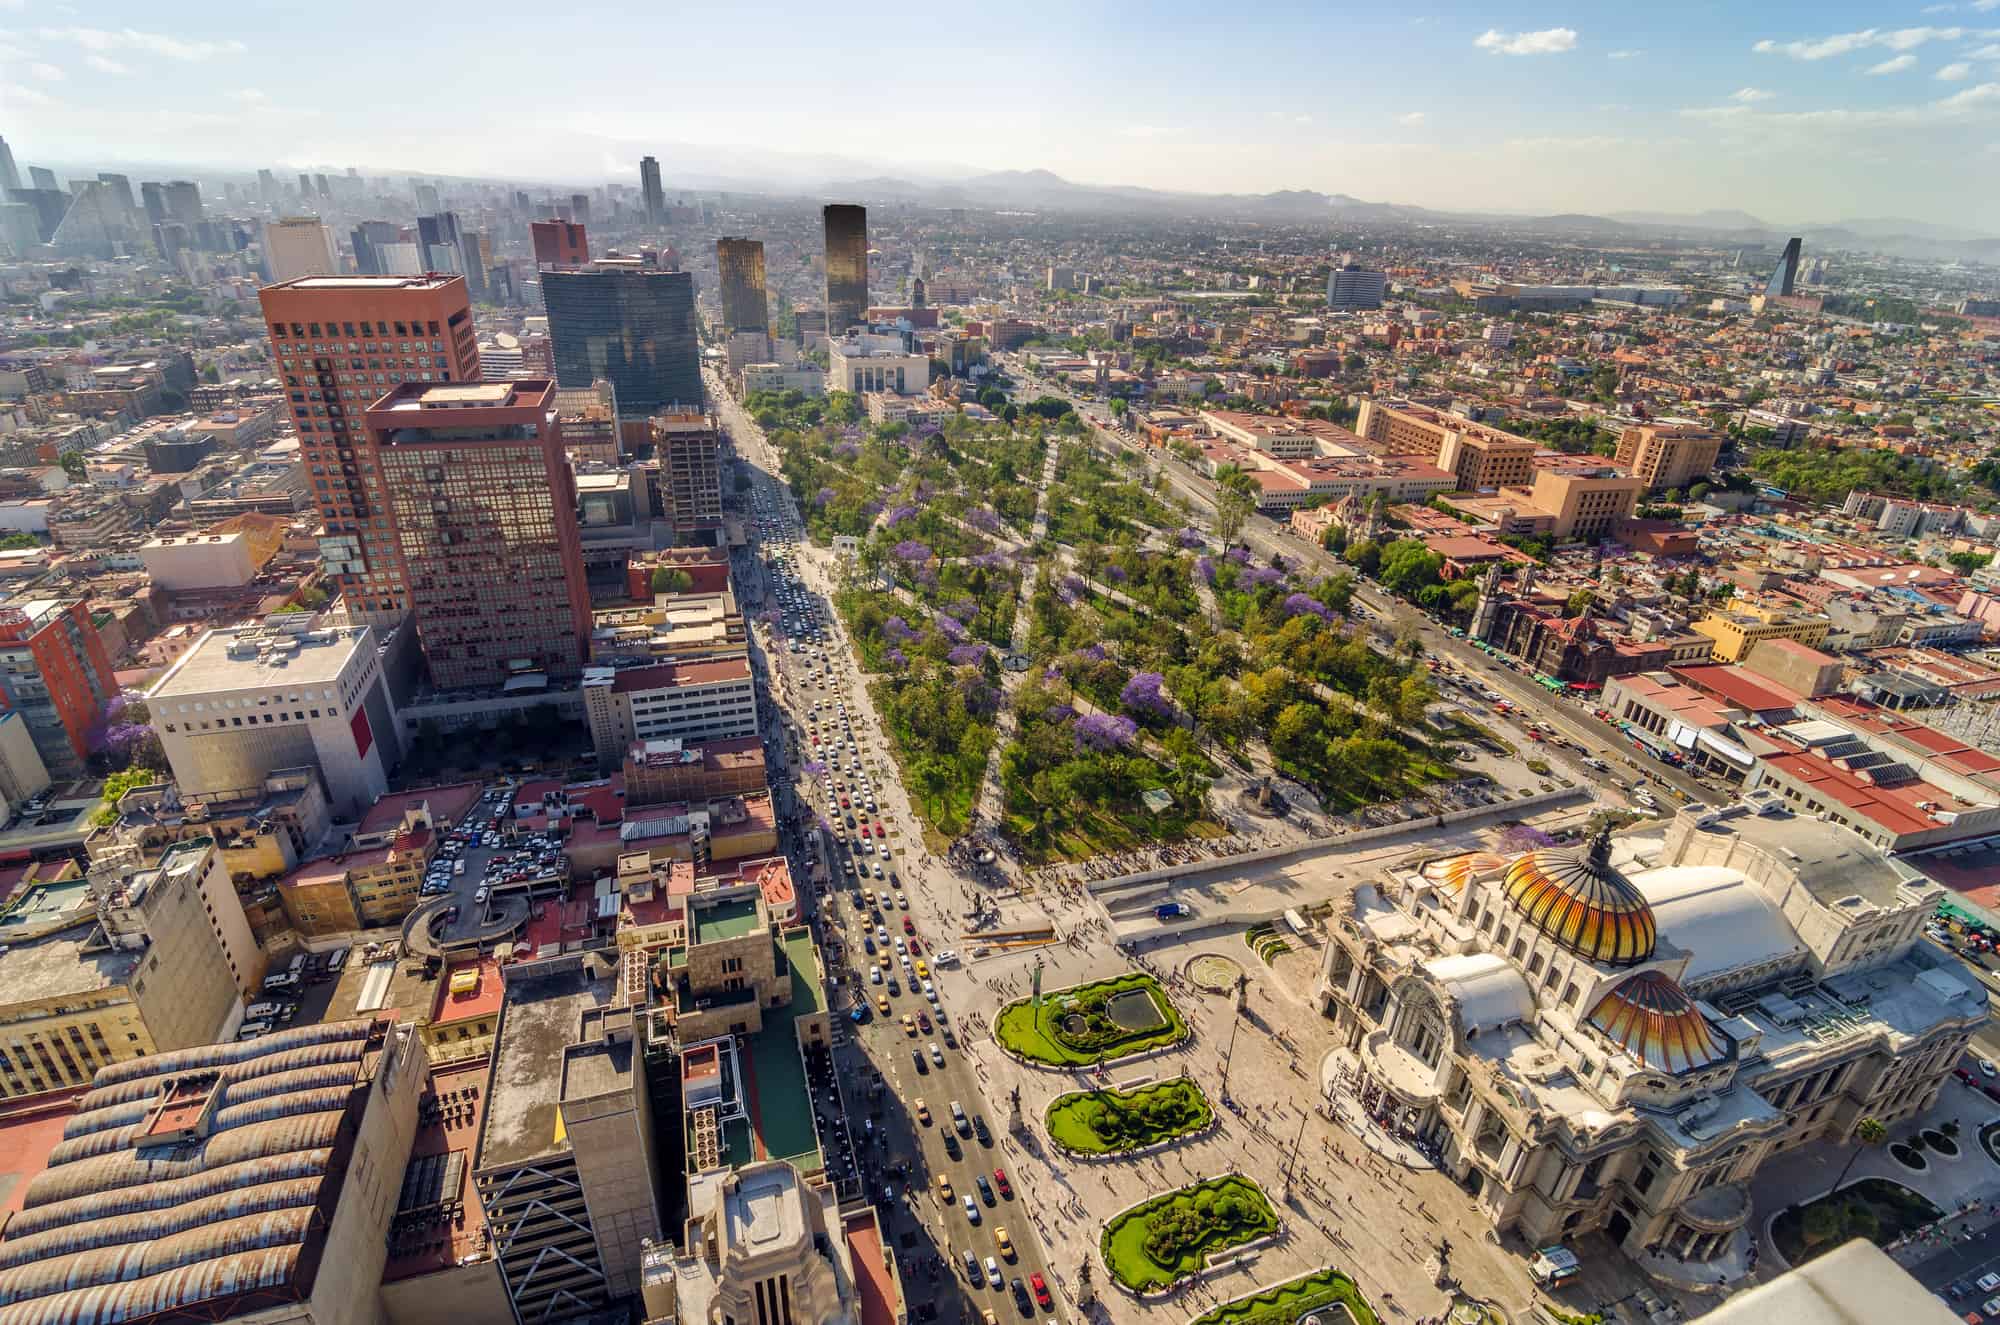 Overhead view of Mexico City.